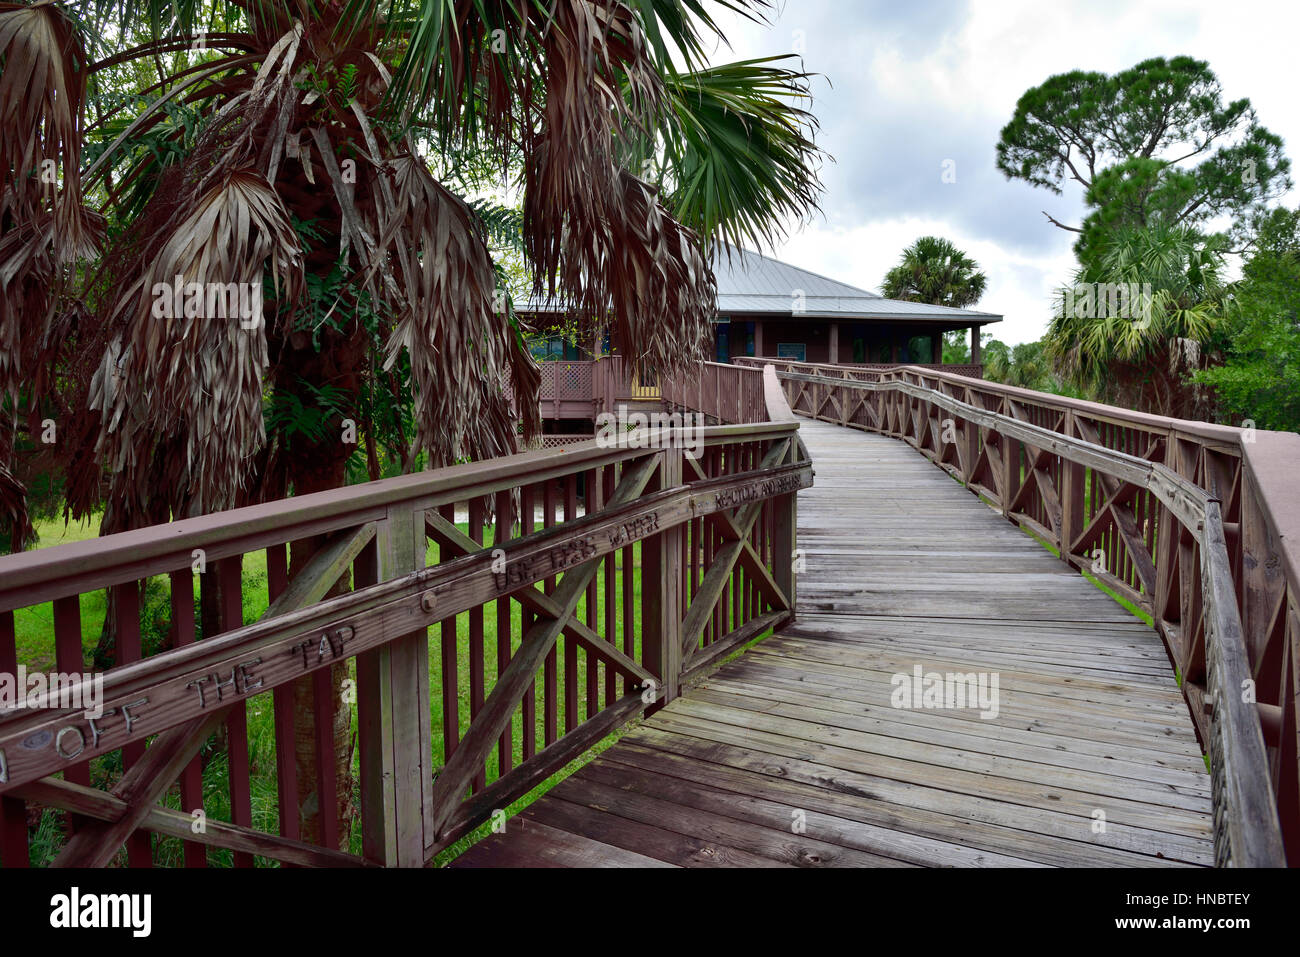 Raised board-walk footpath in Charlotte Harbor Environmental Center, Cape Coral, Florida. Raised to protect from flooding and alligators. Stock Photo